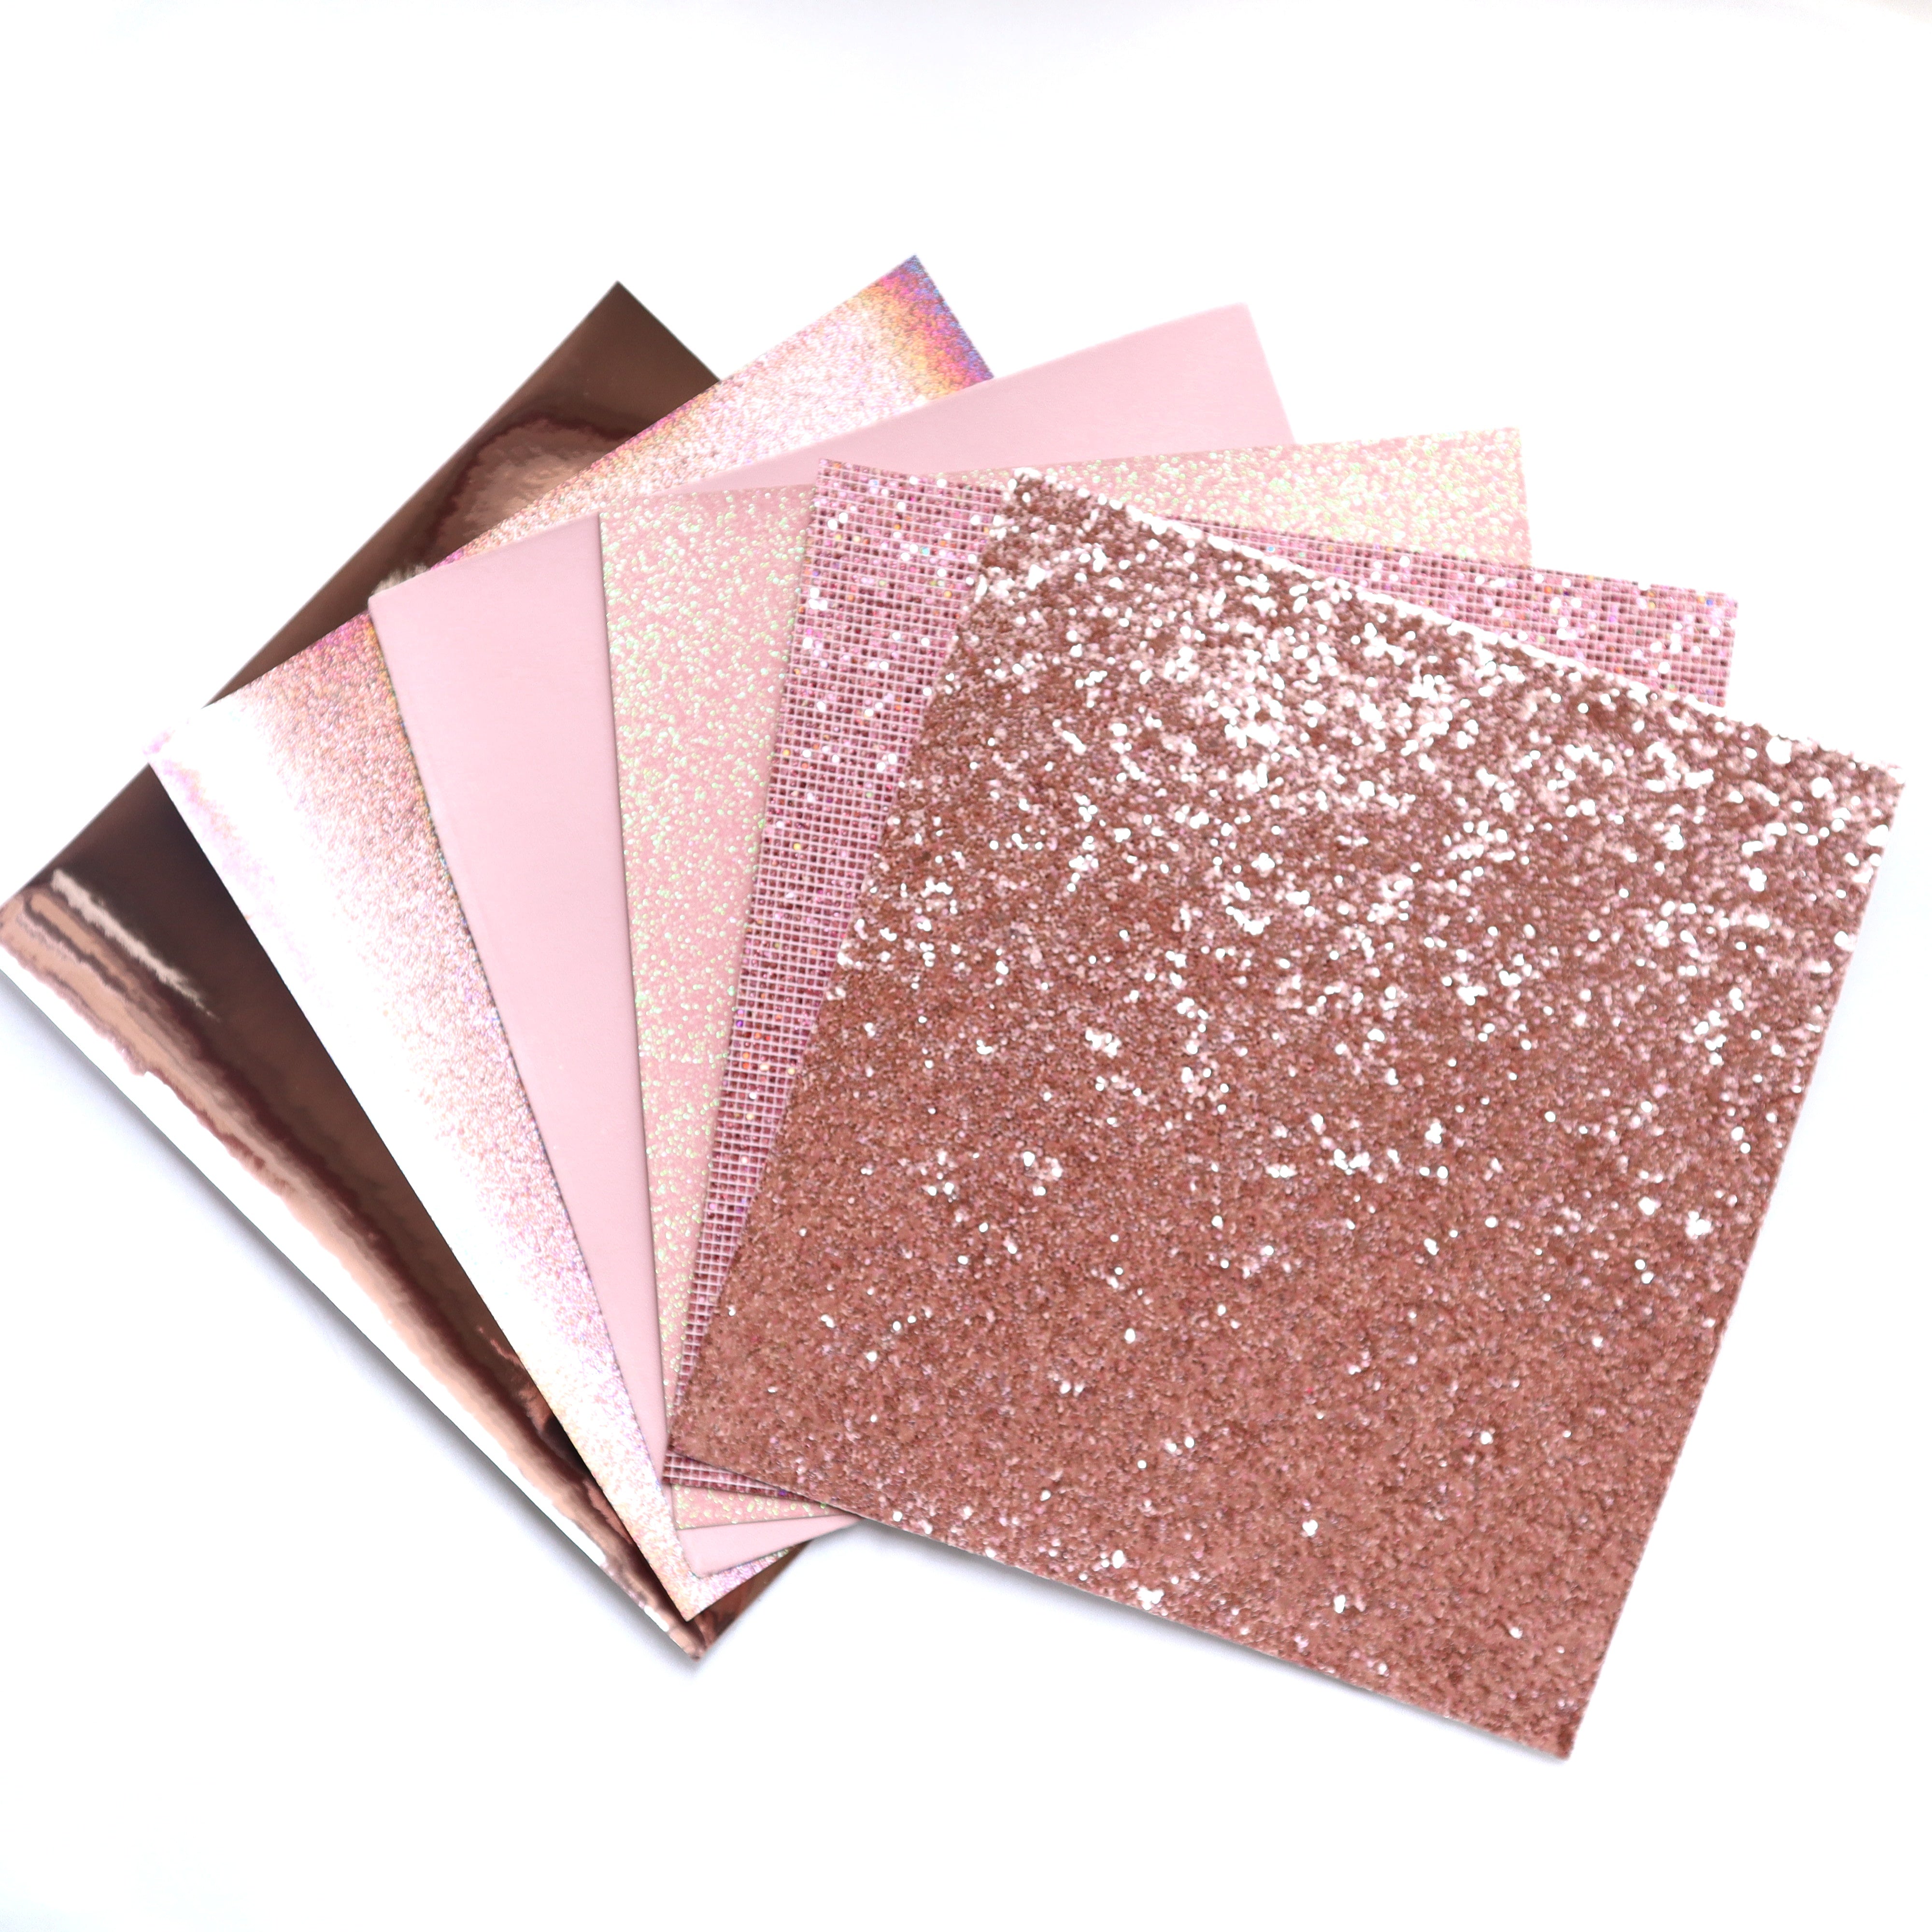 Light Pink Leather Fabric Sheets: 4 Pink and Beige Scrap Leather Pieces Leather Sheets for Craft 5x5In/ 12x12cm